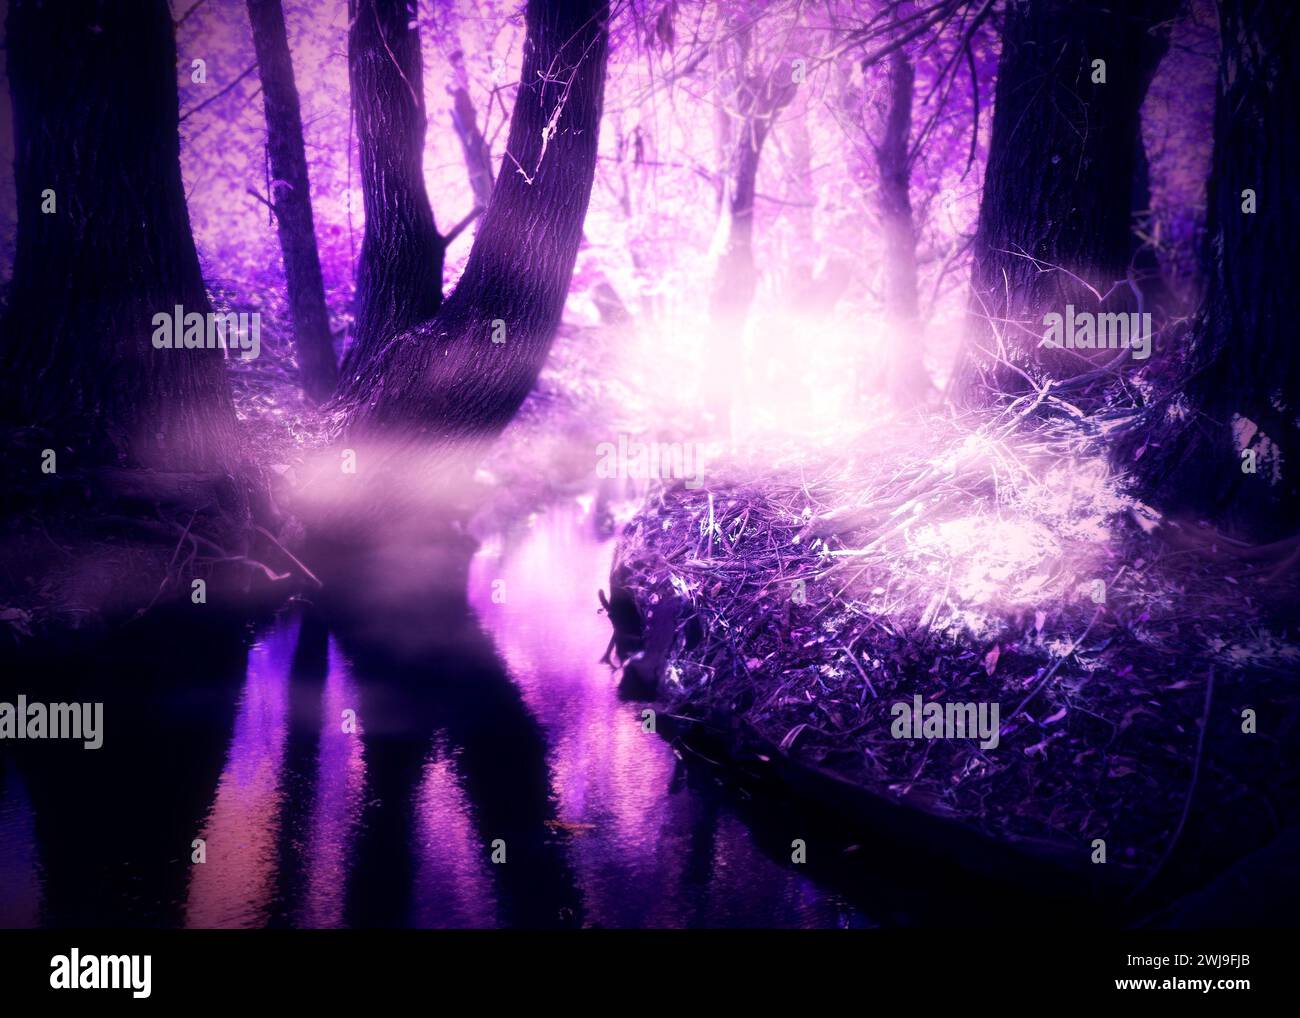 Trees and small river in the fantastic purple forest, photo manipulation. Stock Photo